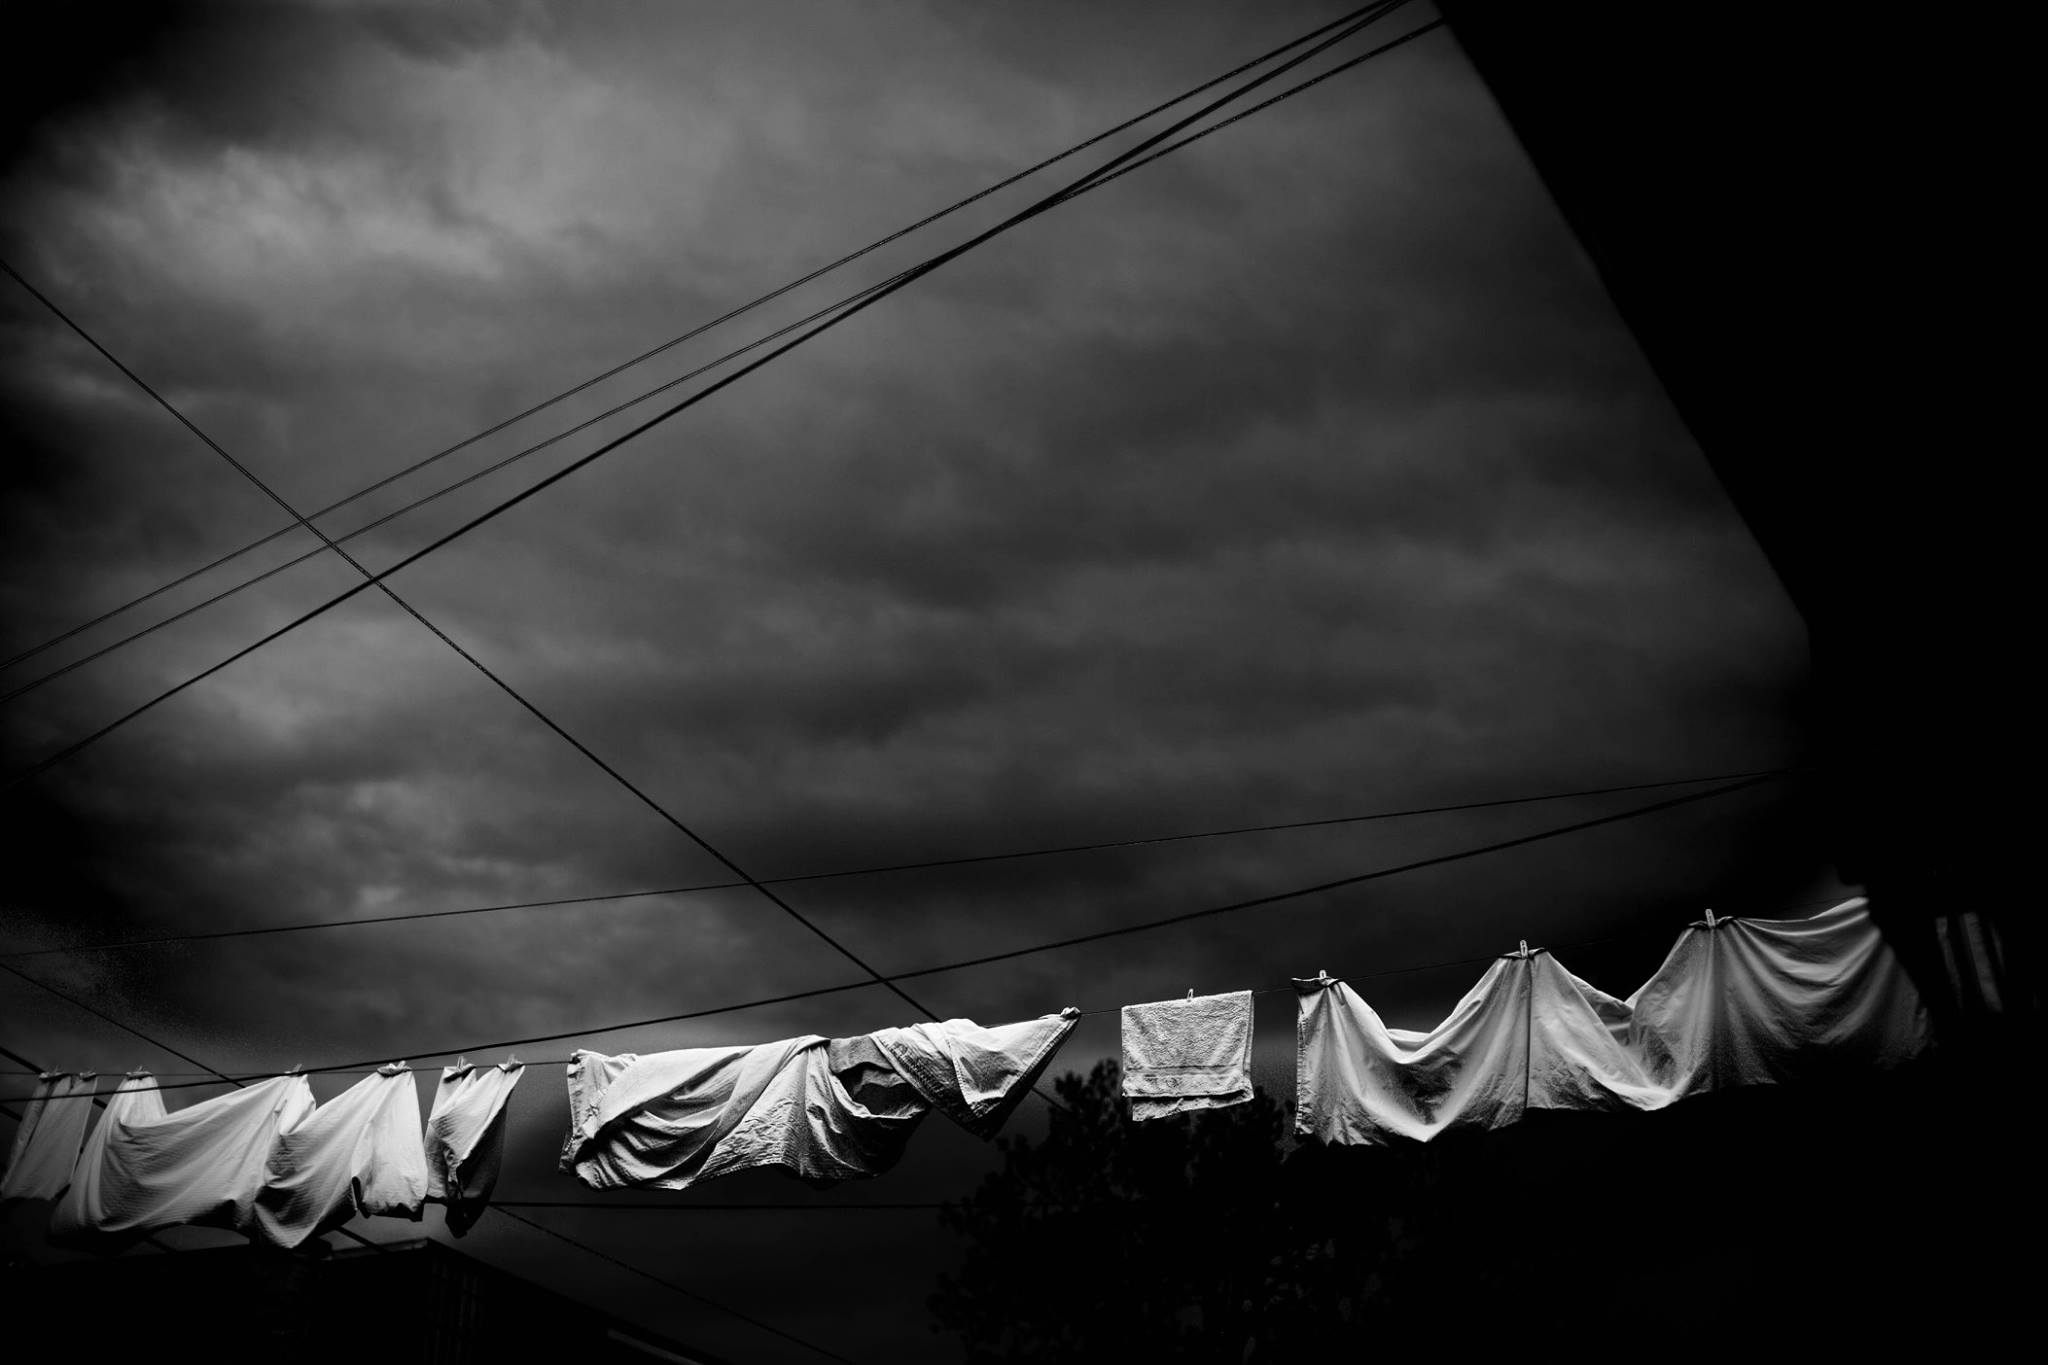 laundry drying on line before storm - Documentary Family Photography